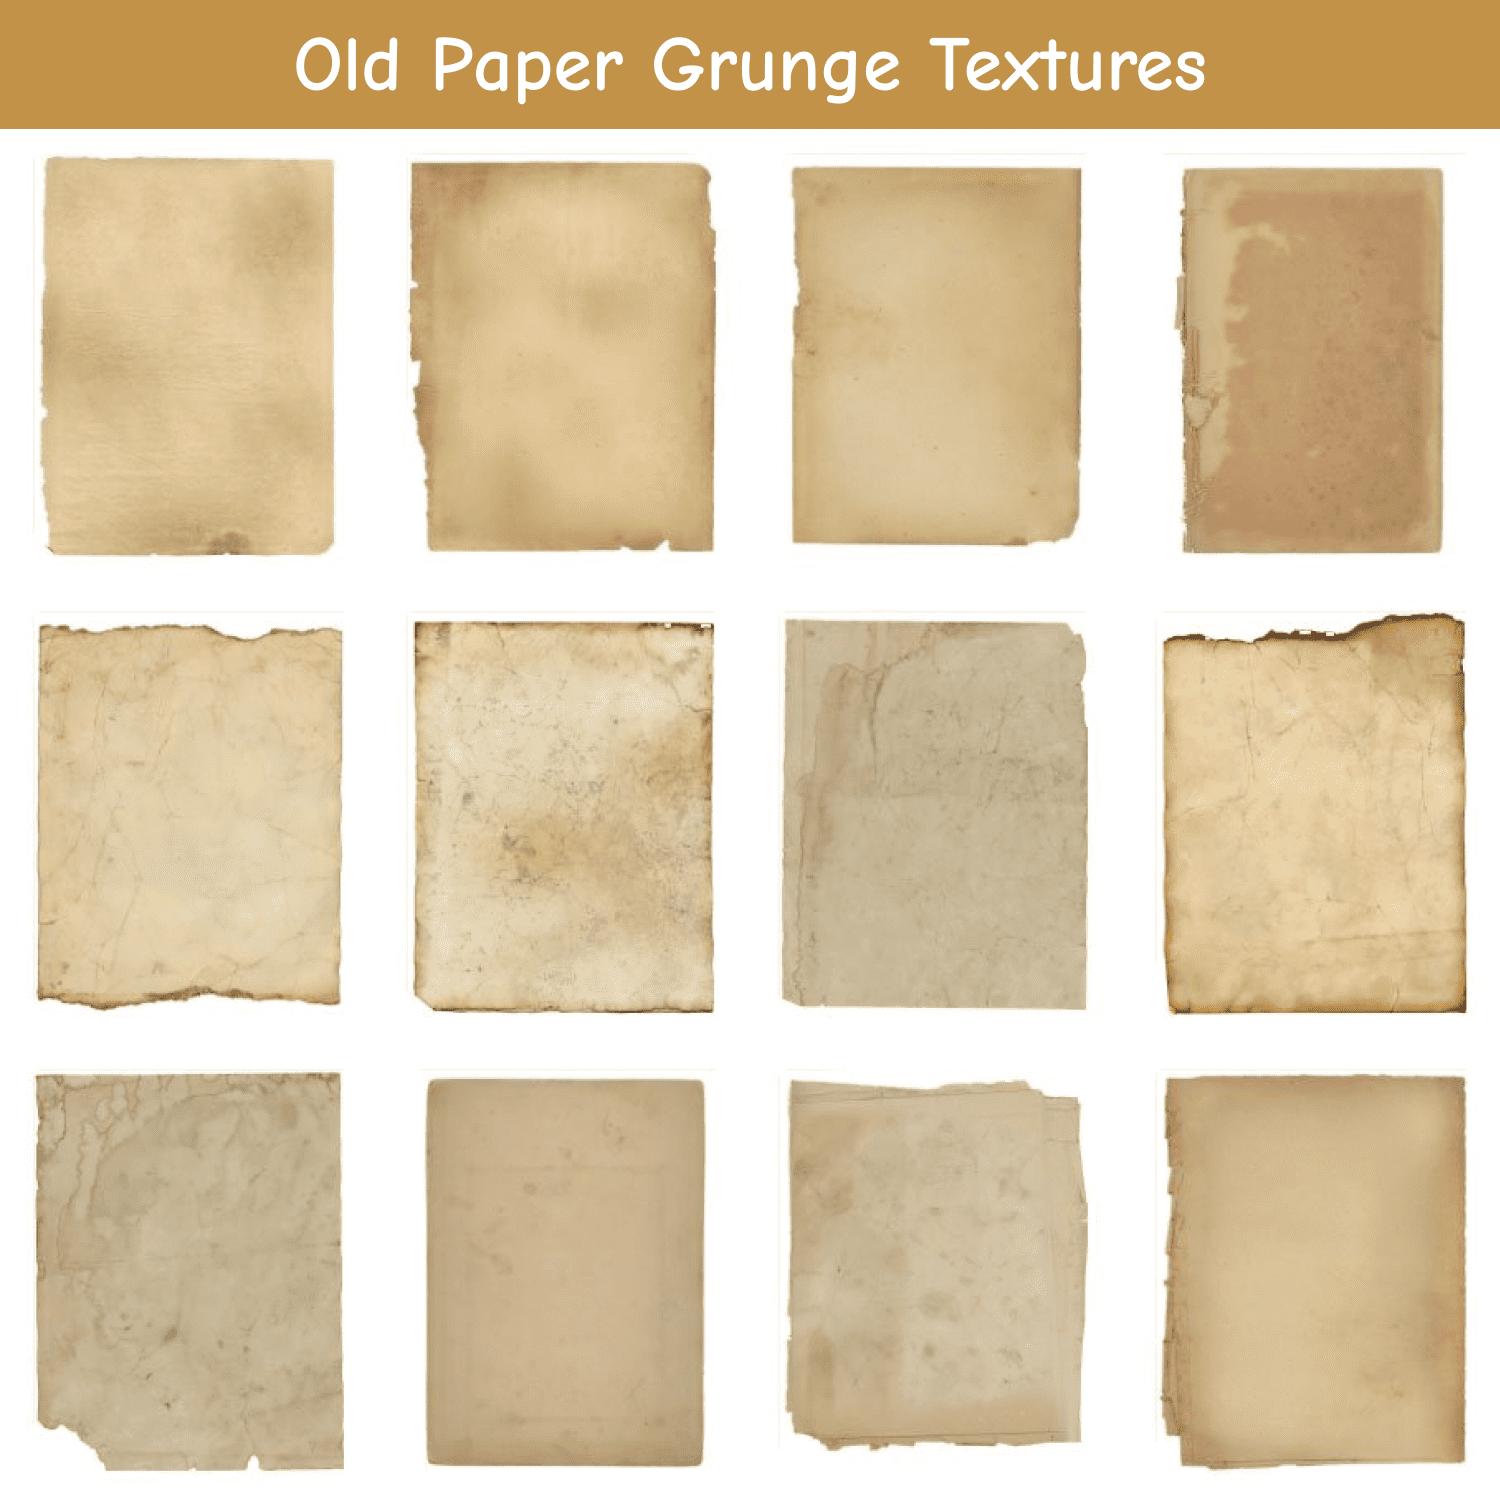 Old Paper Grunge Textures cover.